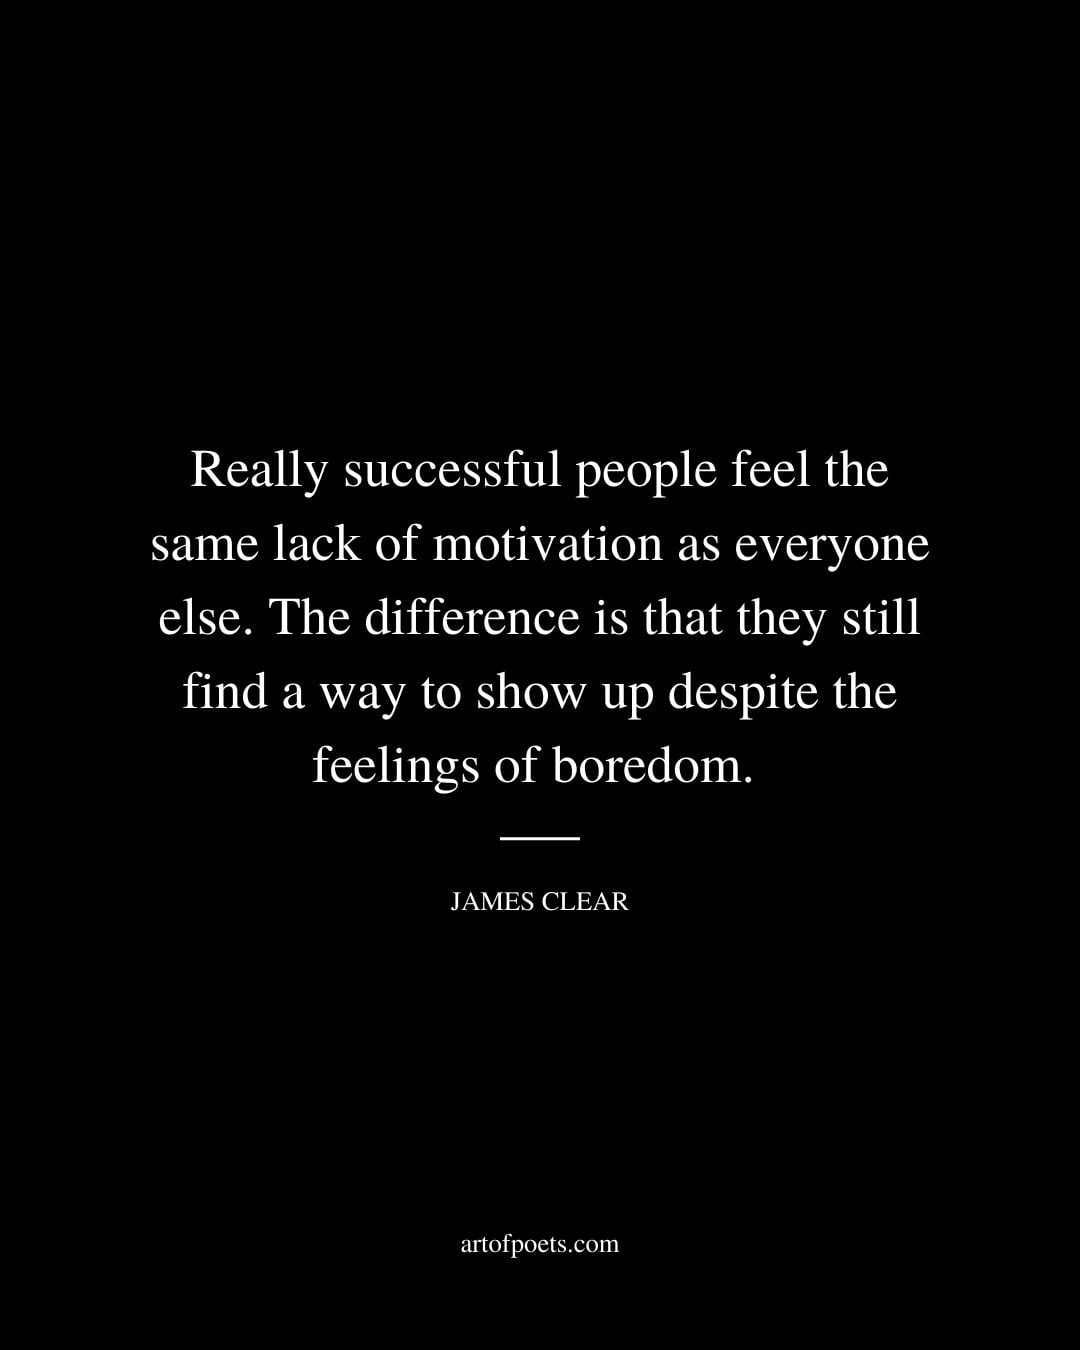 Really successful people feel the same lack of motivation as everyone else. The difference is that they still find a way to show up despite the feelings of boredom